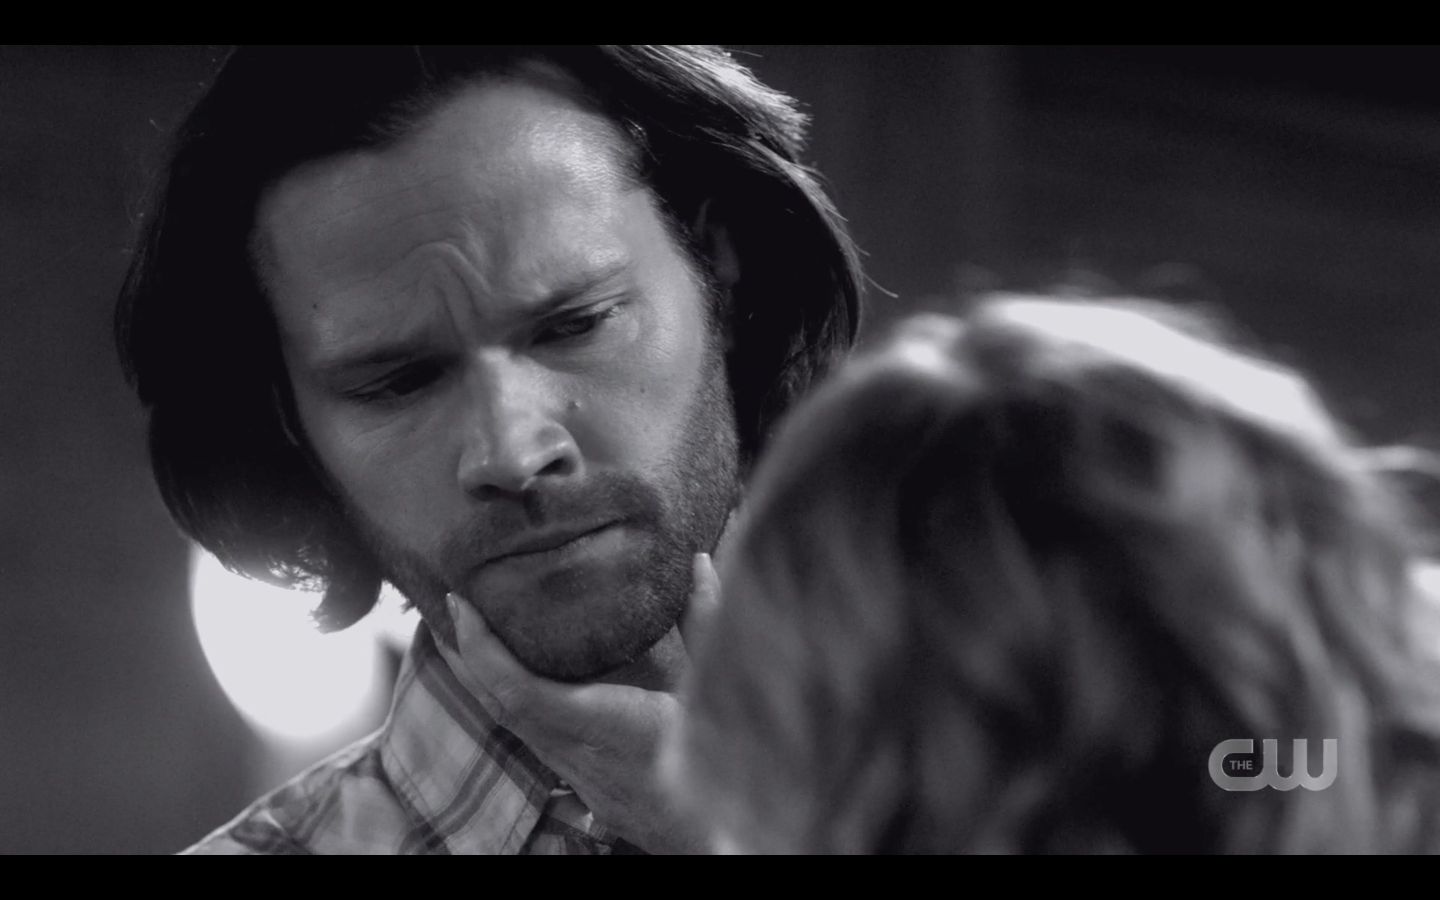 Sam Winchester reacts to Mary Samantha Smith stroking his cheek SPN 14.18